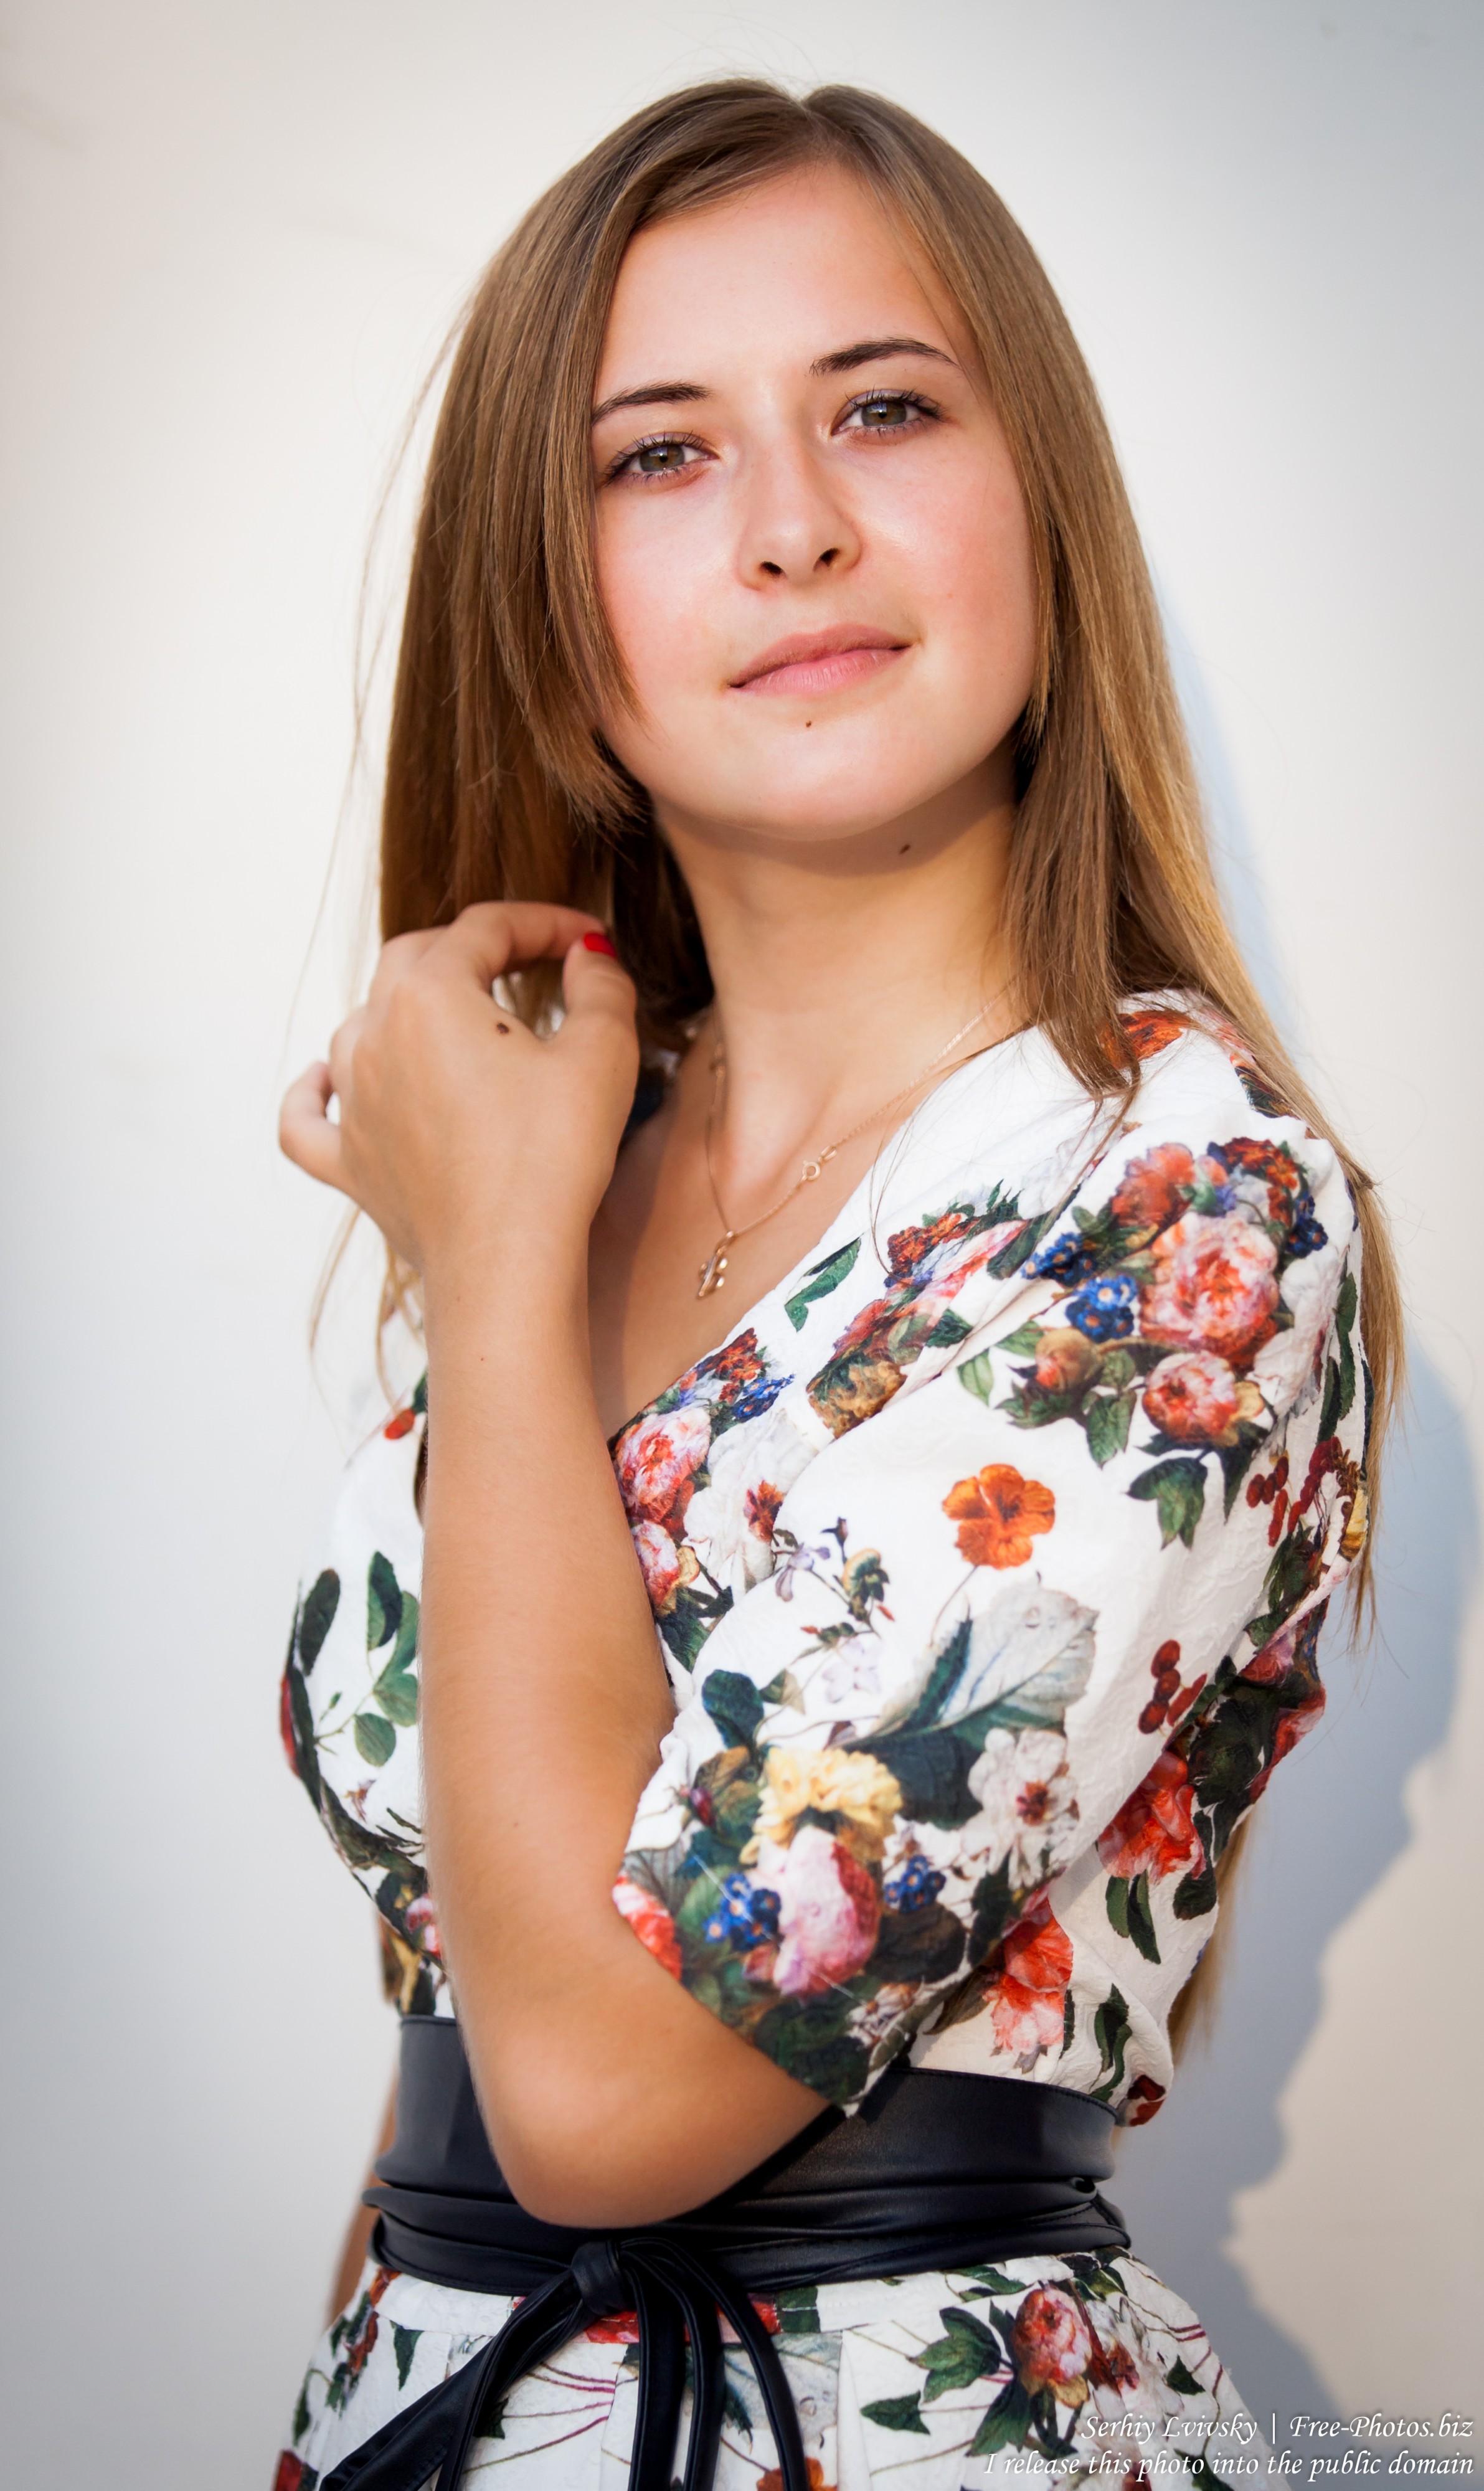 Photo Of An 18 Year Old Girl Photographed By Serhiy Lvivsky In August 2015 Picture 6